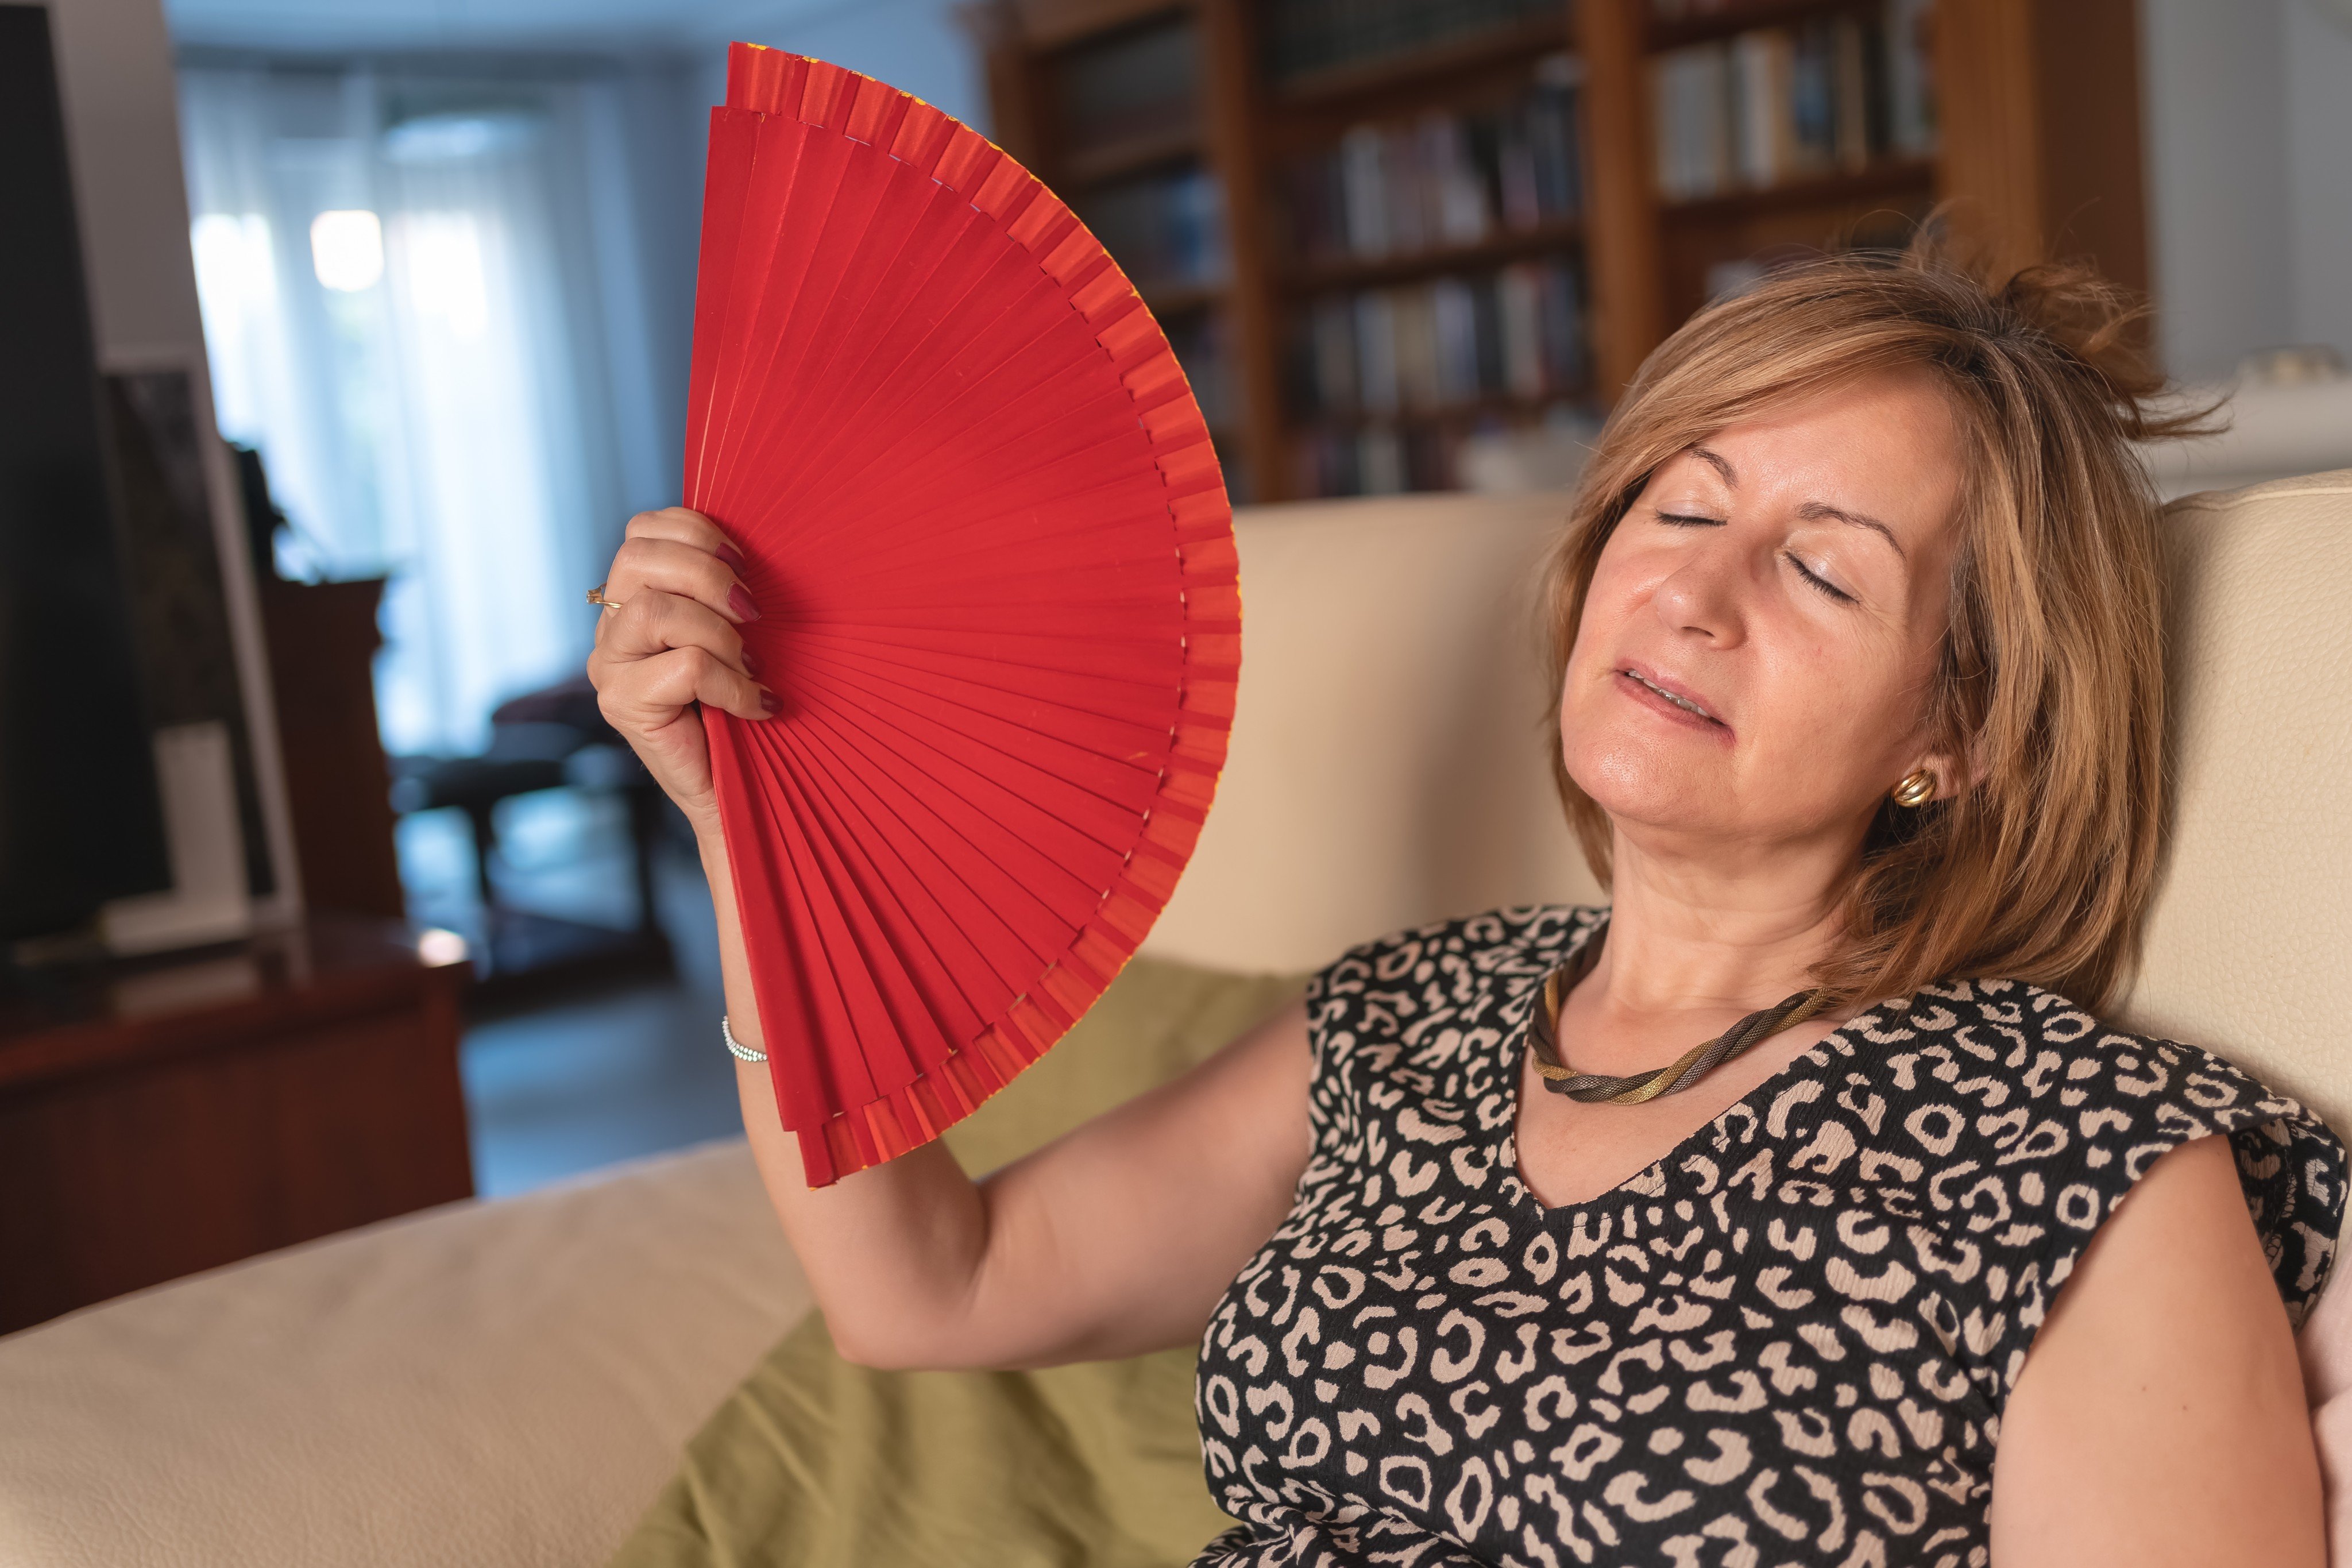 For some women, both depression and anxiety are common during menopause and post menopause, along with hot flushes and night sweats. Removing ovarian tissue, freezing it and implanting it again later could delay or prevent menopause, a leading fertility researcher says. Photo: Shutterstock